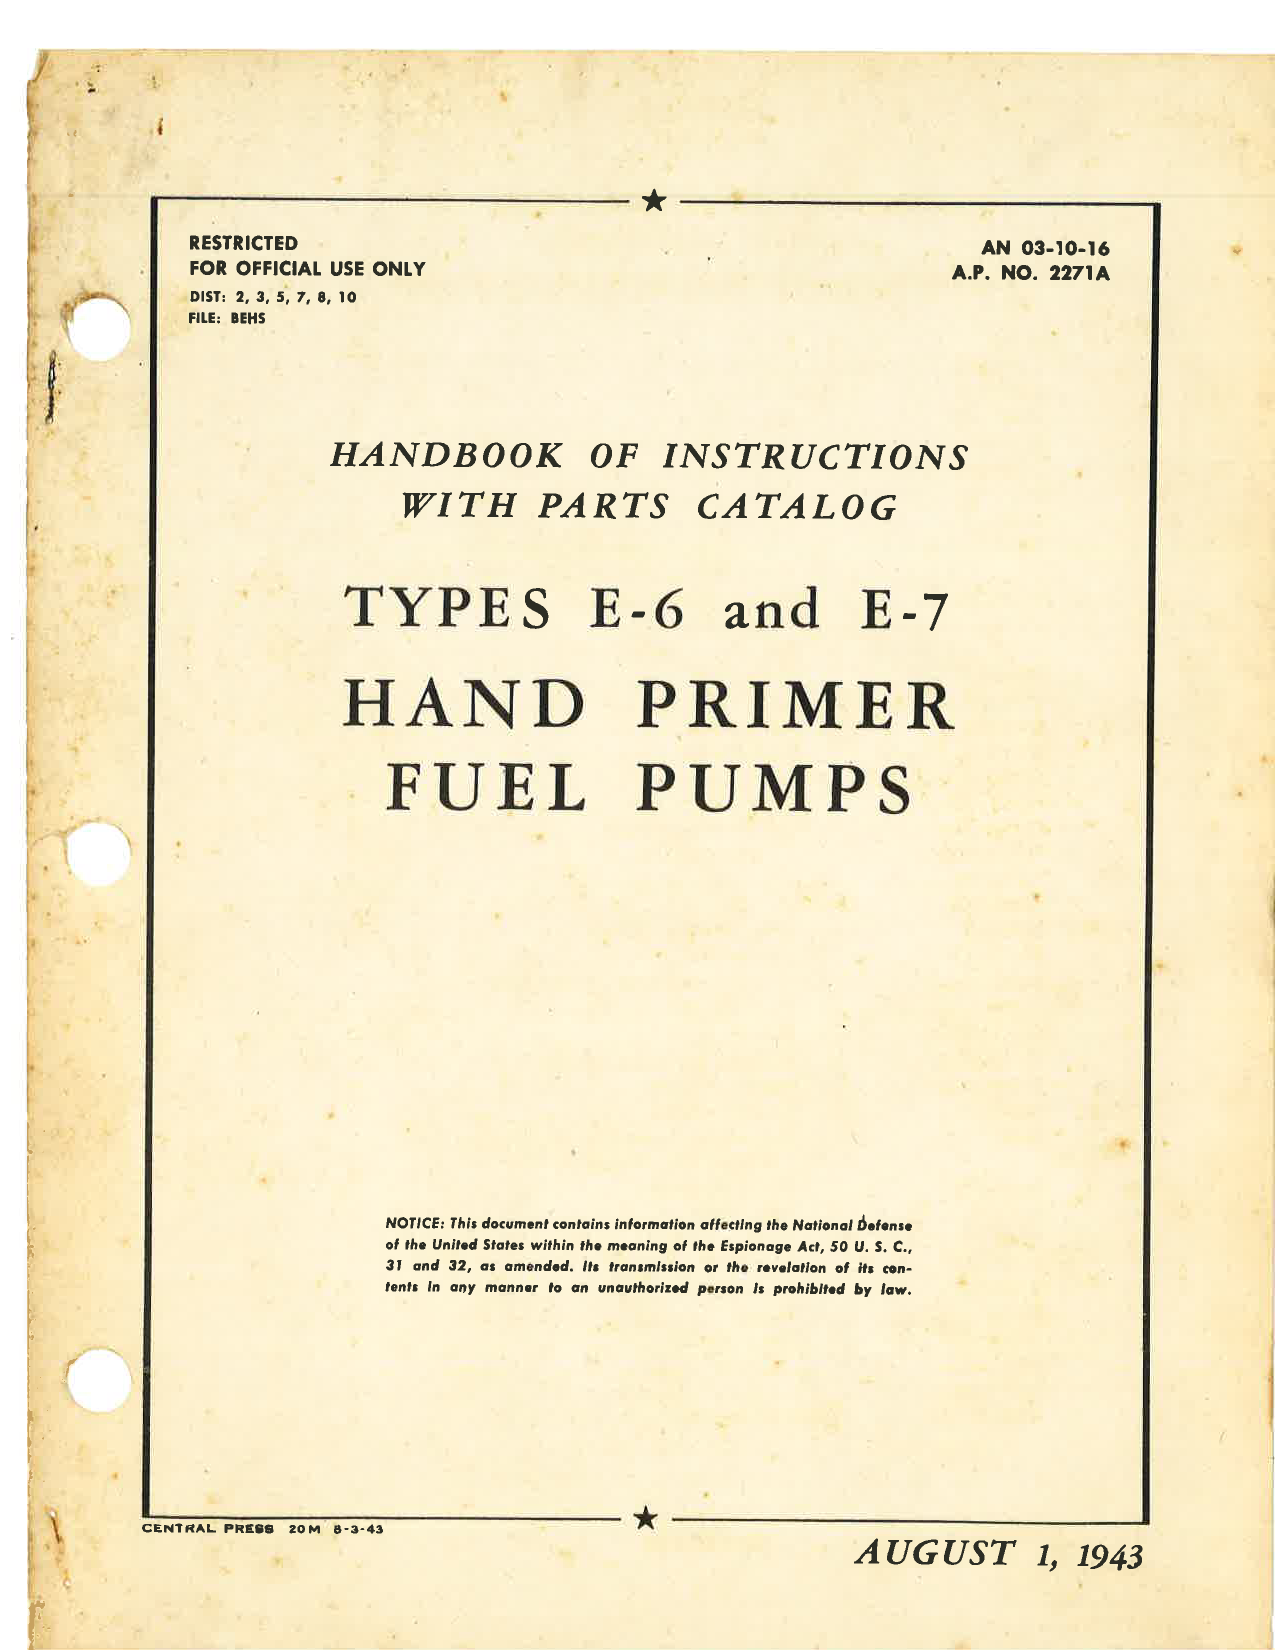 Sample page 1 from AirCorps Library document: Handbook of Instructions with Parts Catalog for Types E-6 and E-7 Hand Primer Fuel Pumps